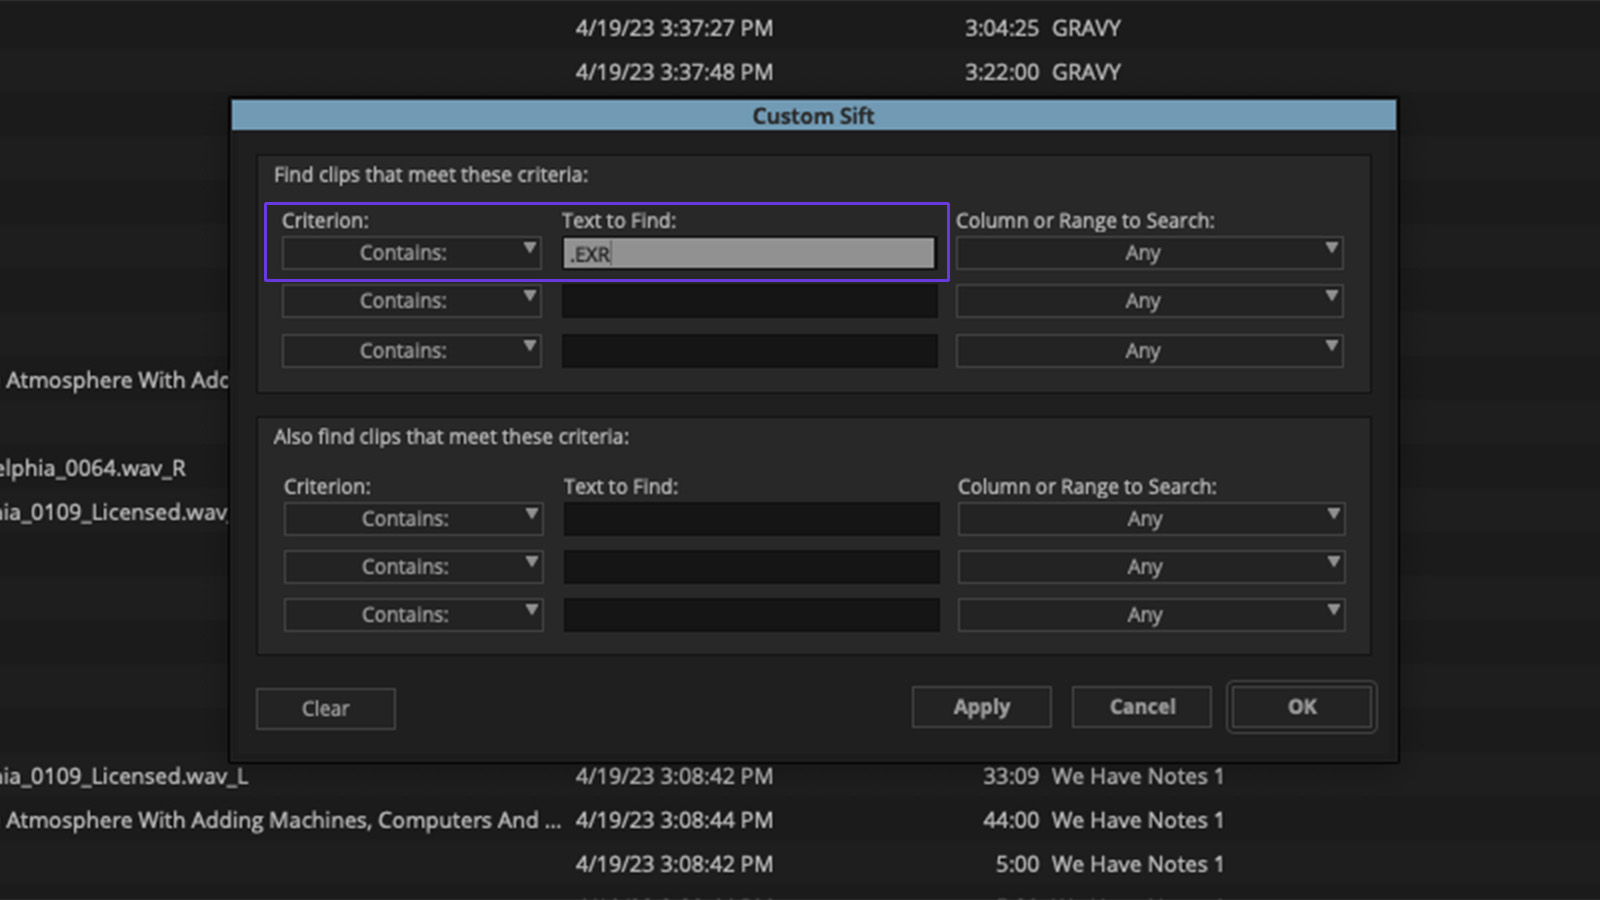 Setting up a Custom Sift in Media Composer.